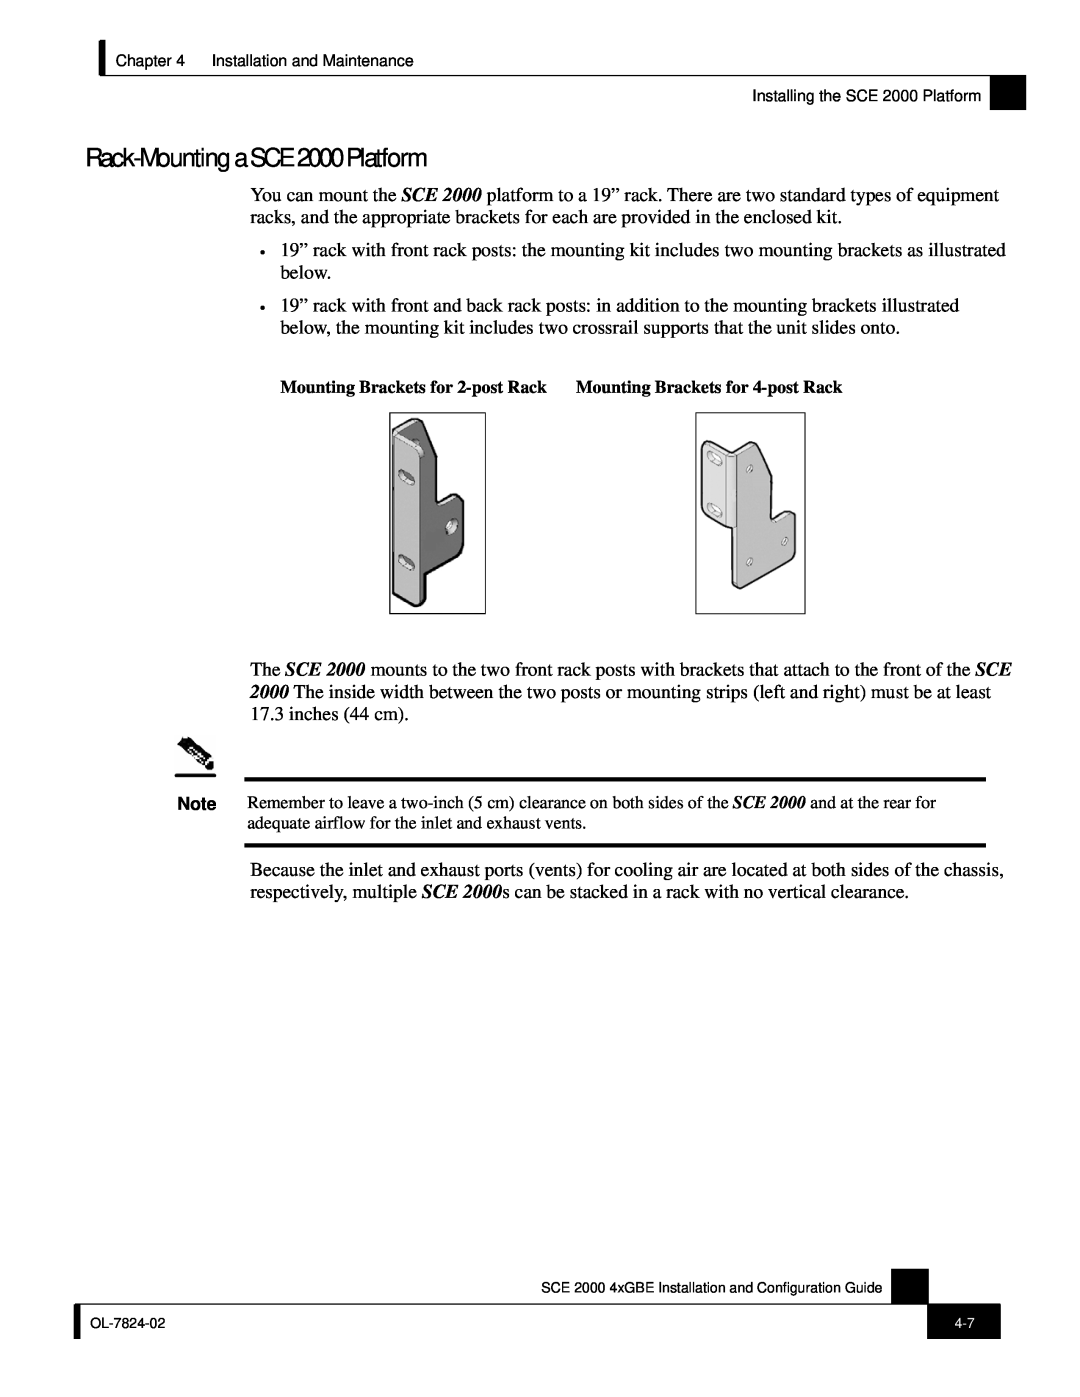 Cisco Systems SCE 2000 4xGBE manual Rack-Mounting a SCE 2000 Platform 